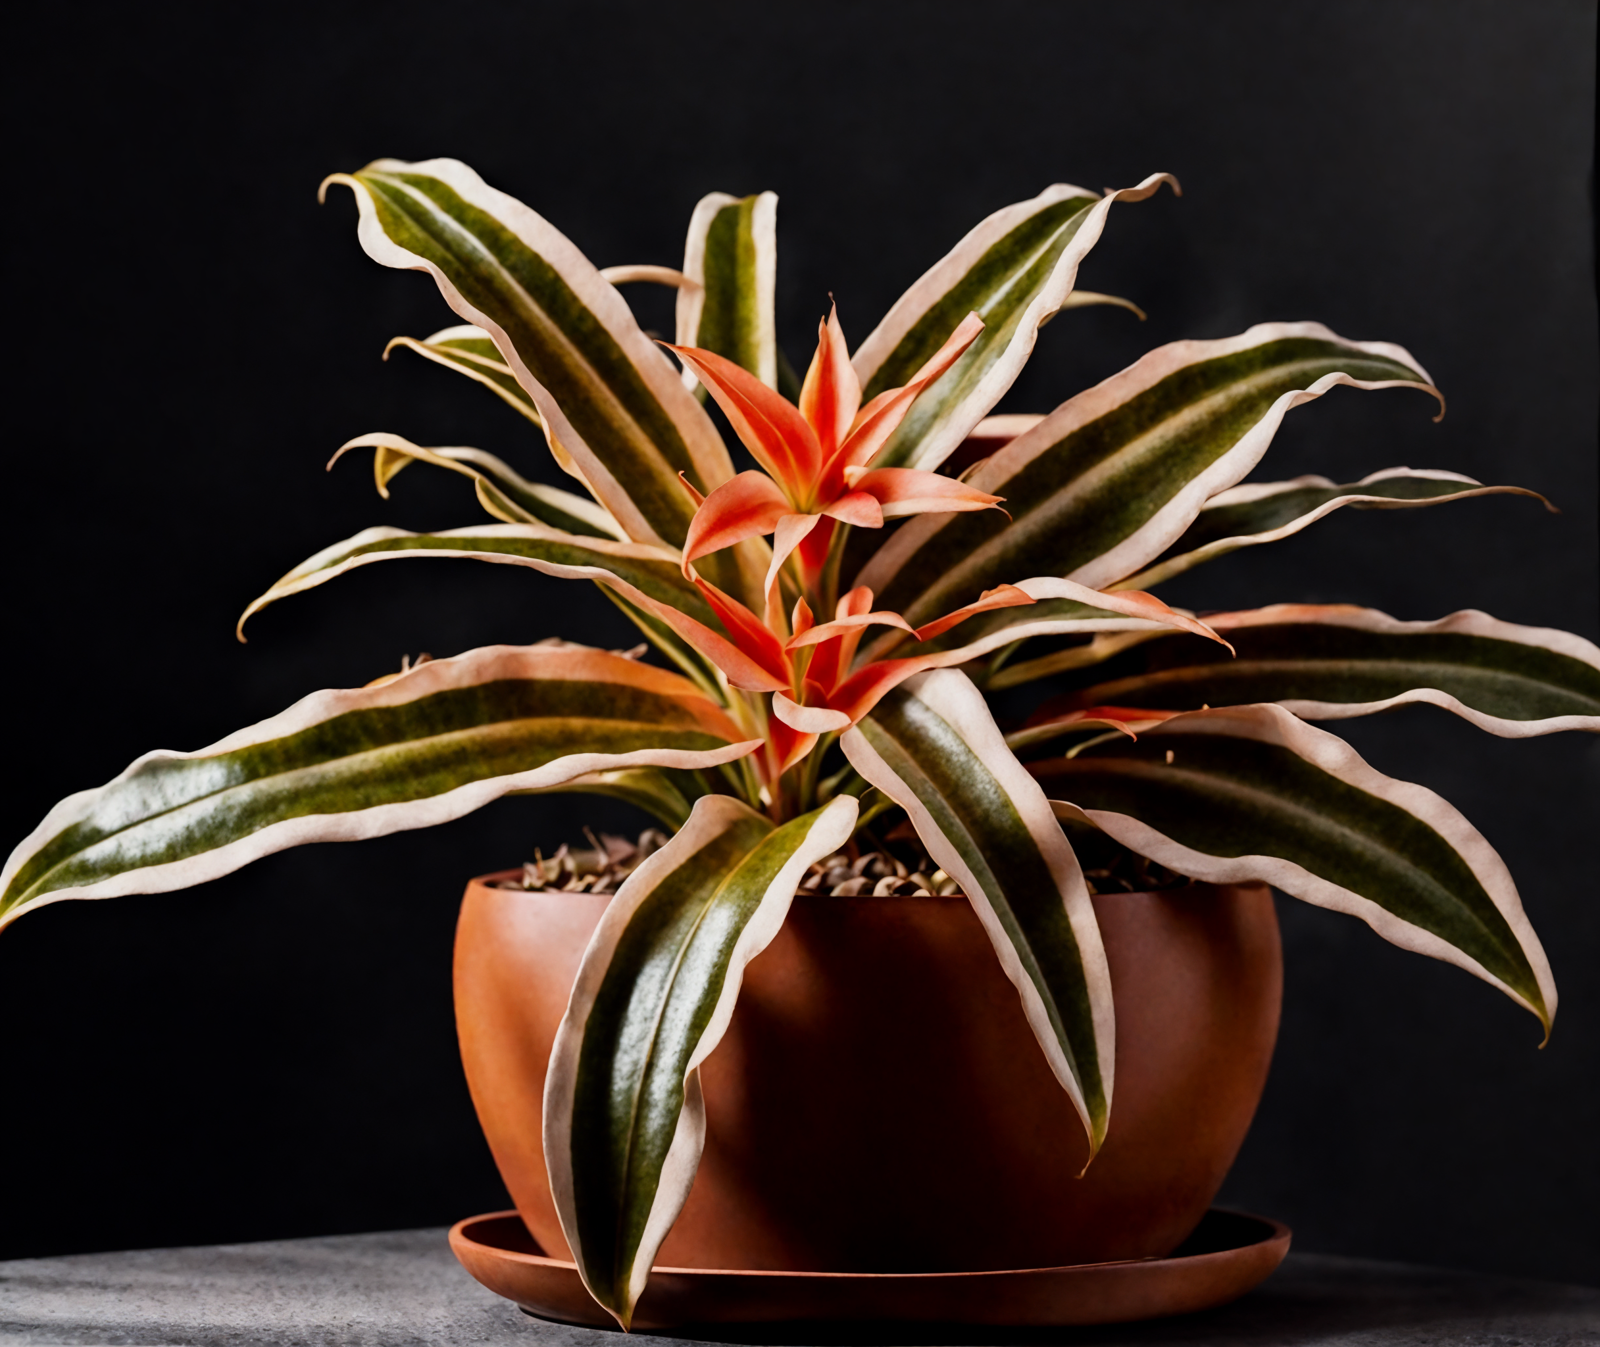 Cryptanthus bivittatus, with red leaves, in a brown bowl, clear lighting, against a dark background.